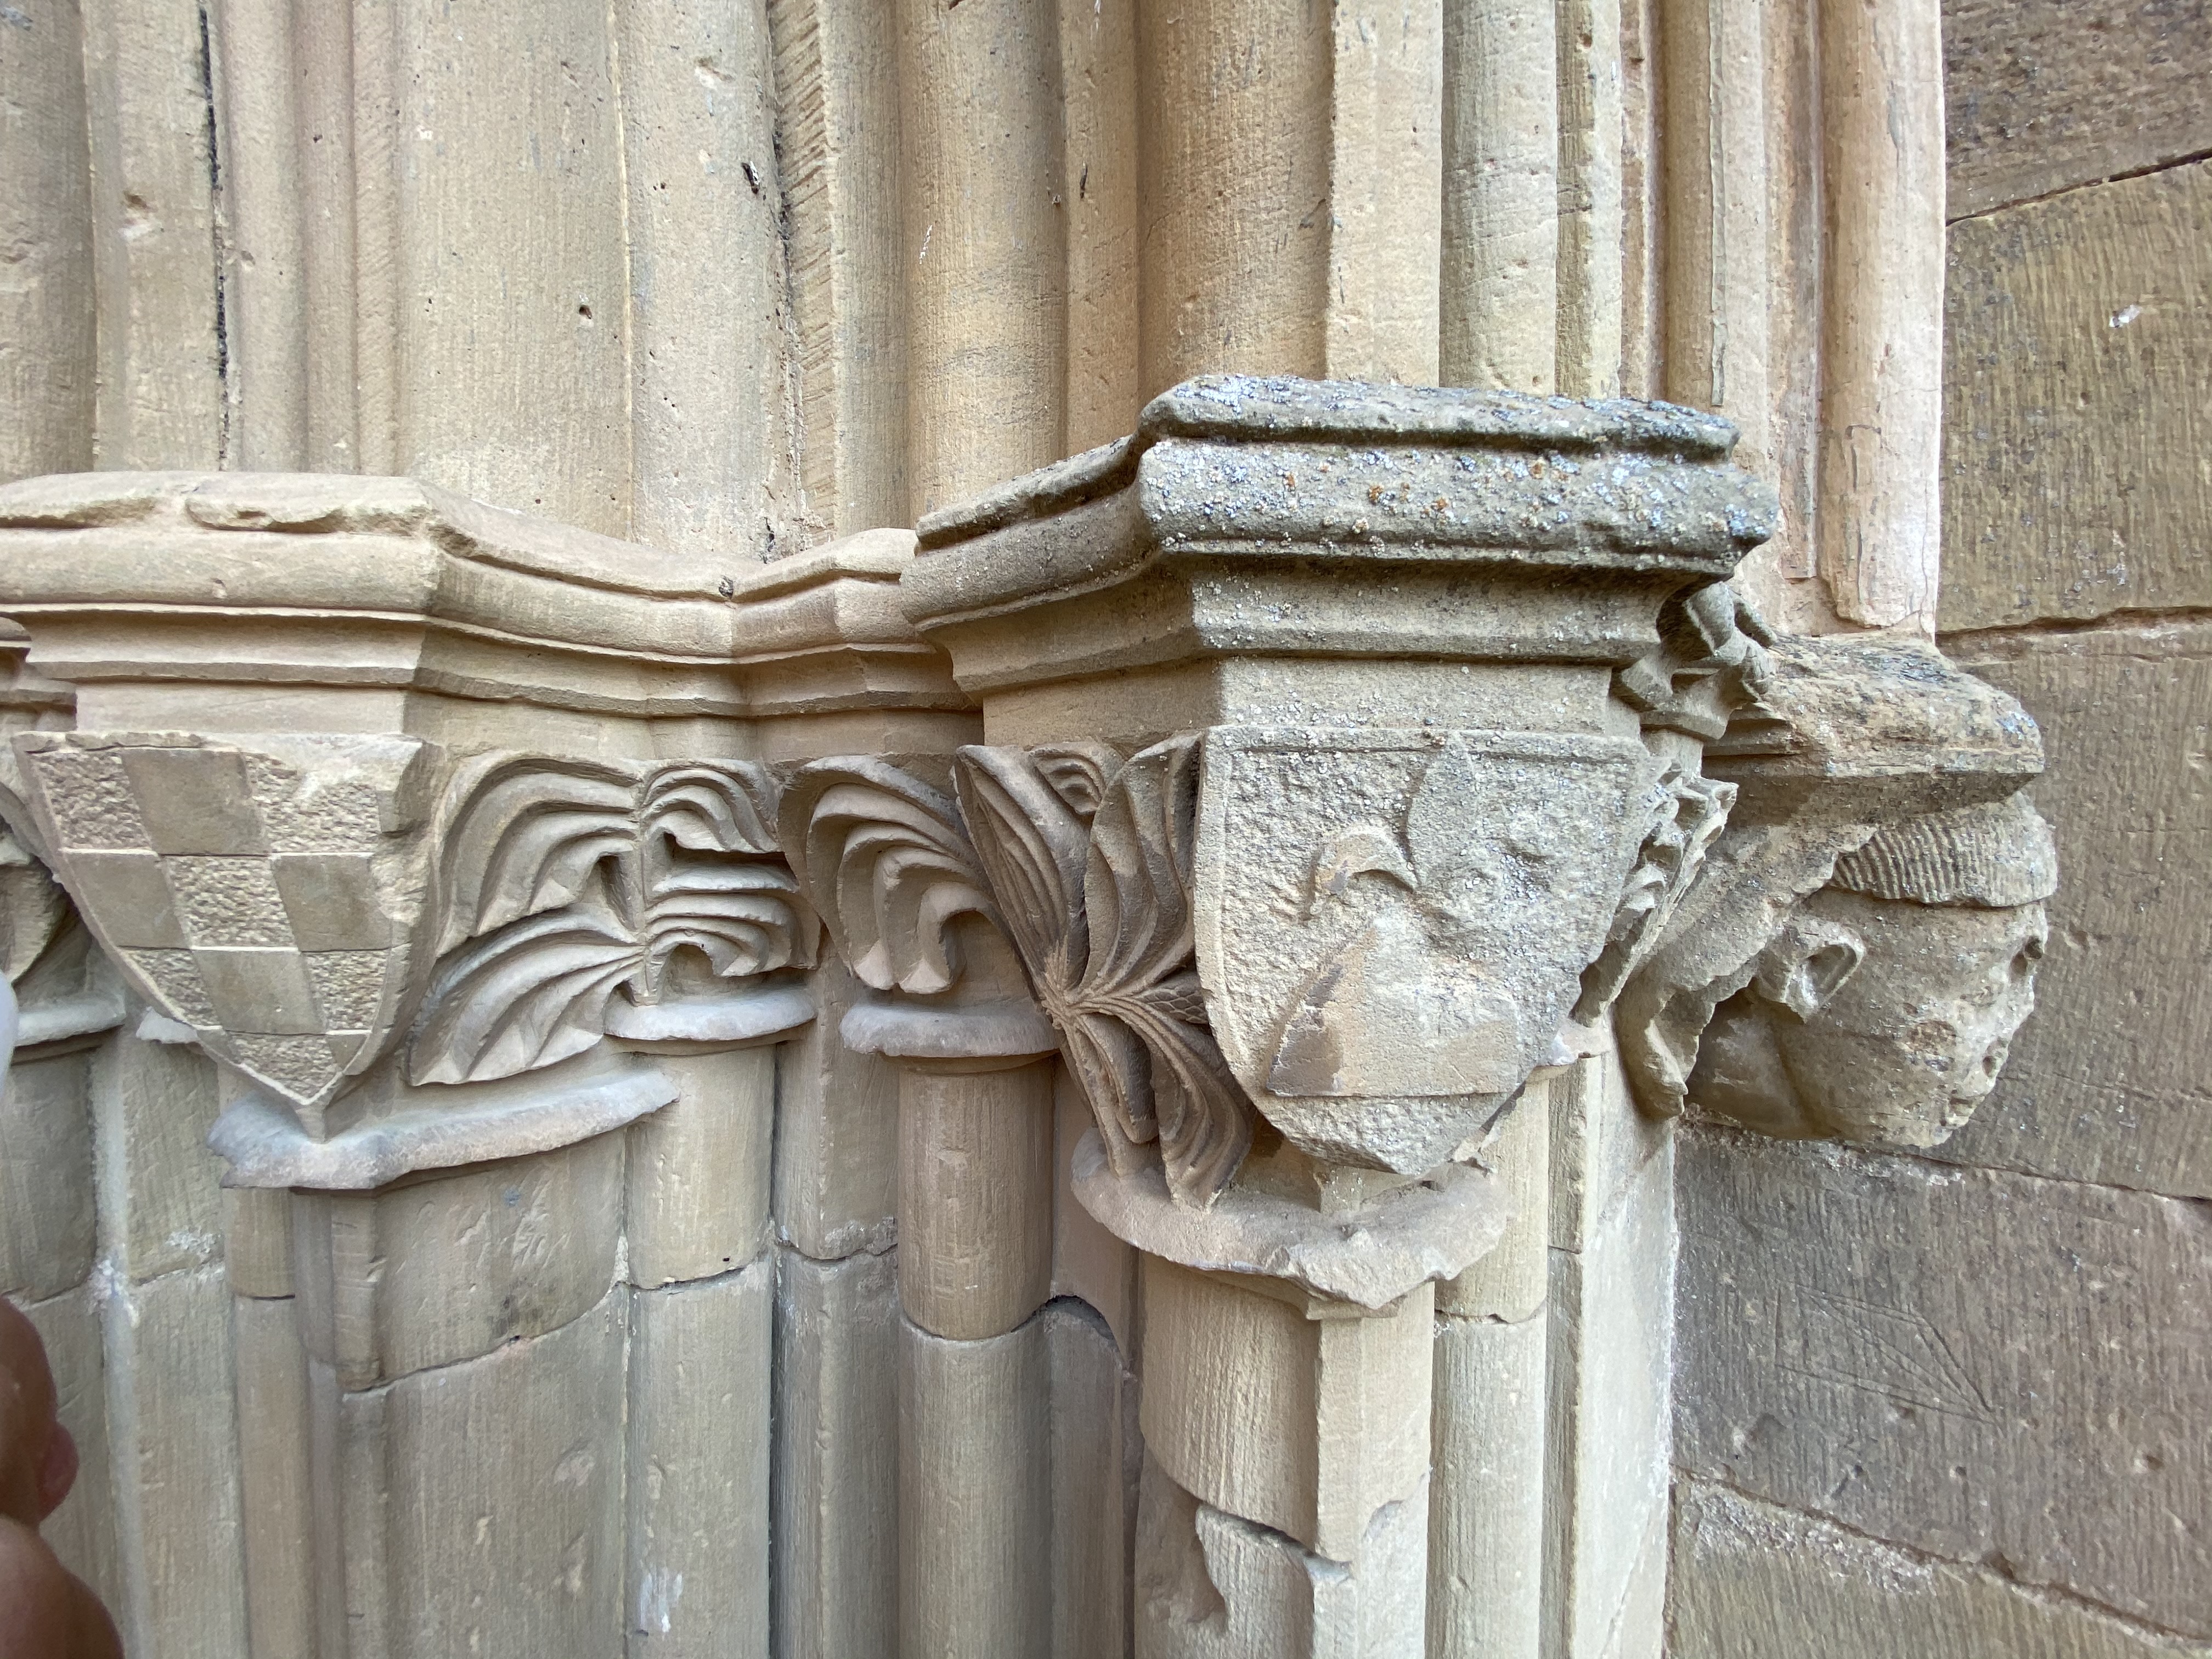 Series of stone capitals with coat of arms, foliate motifs, a flowering hill, and a small head bracketing the gothic doorway on the right.